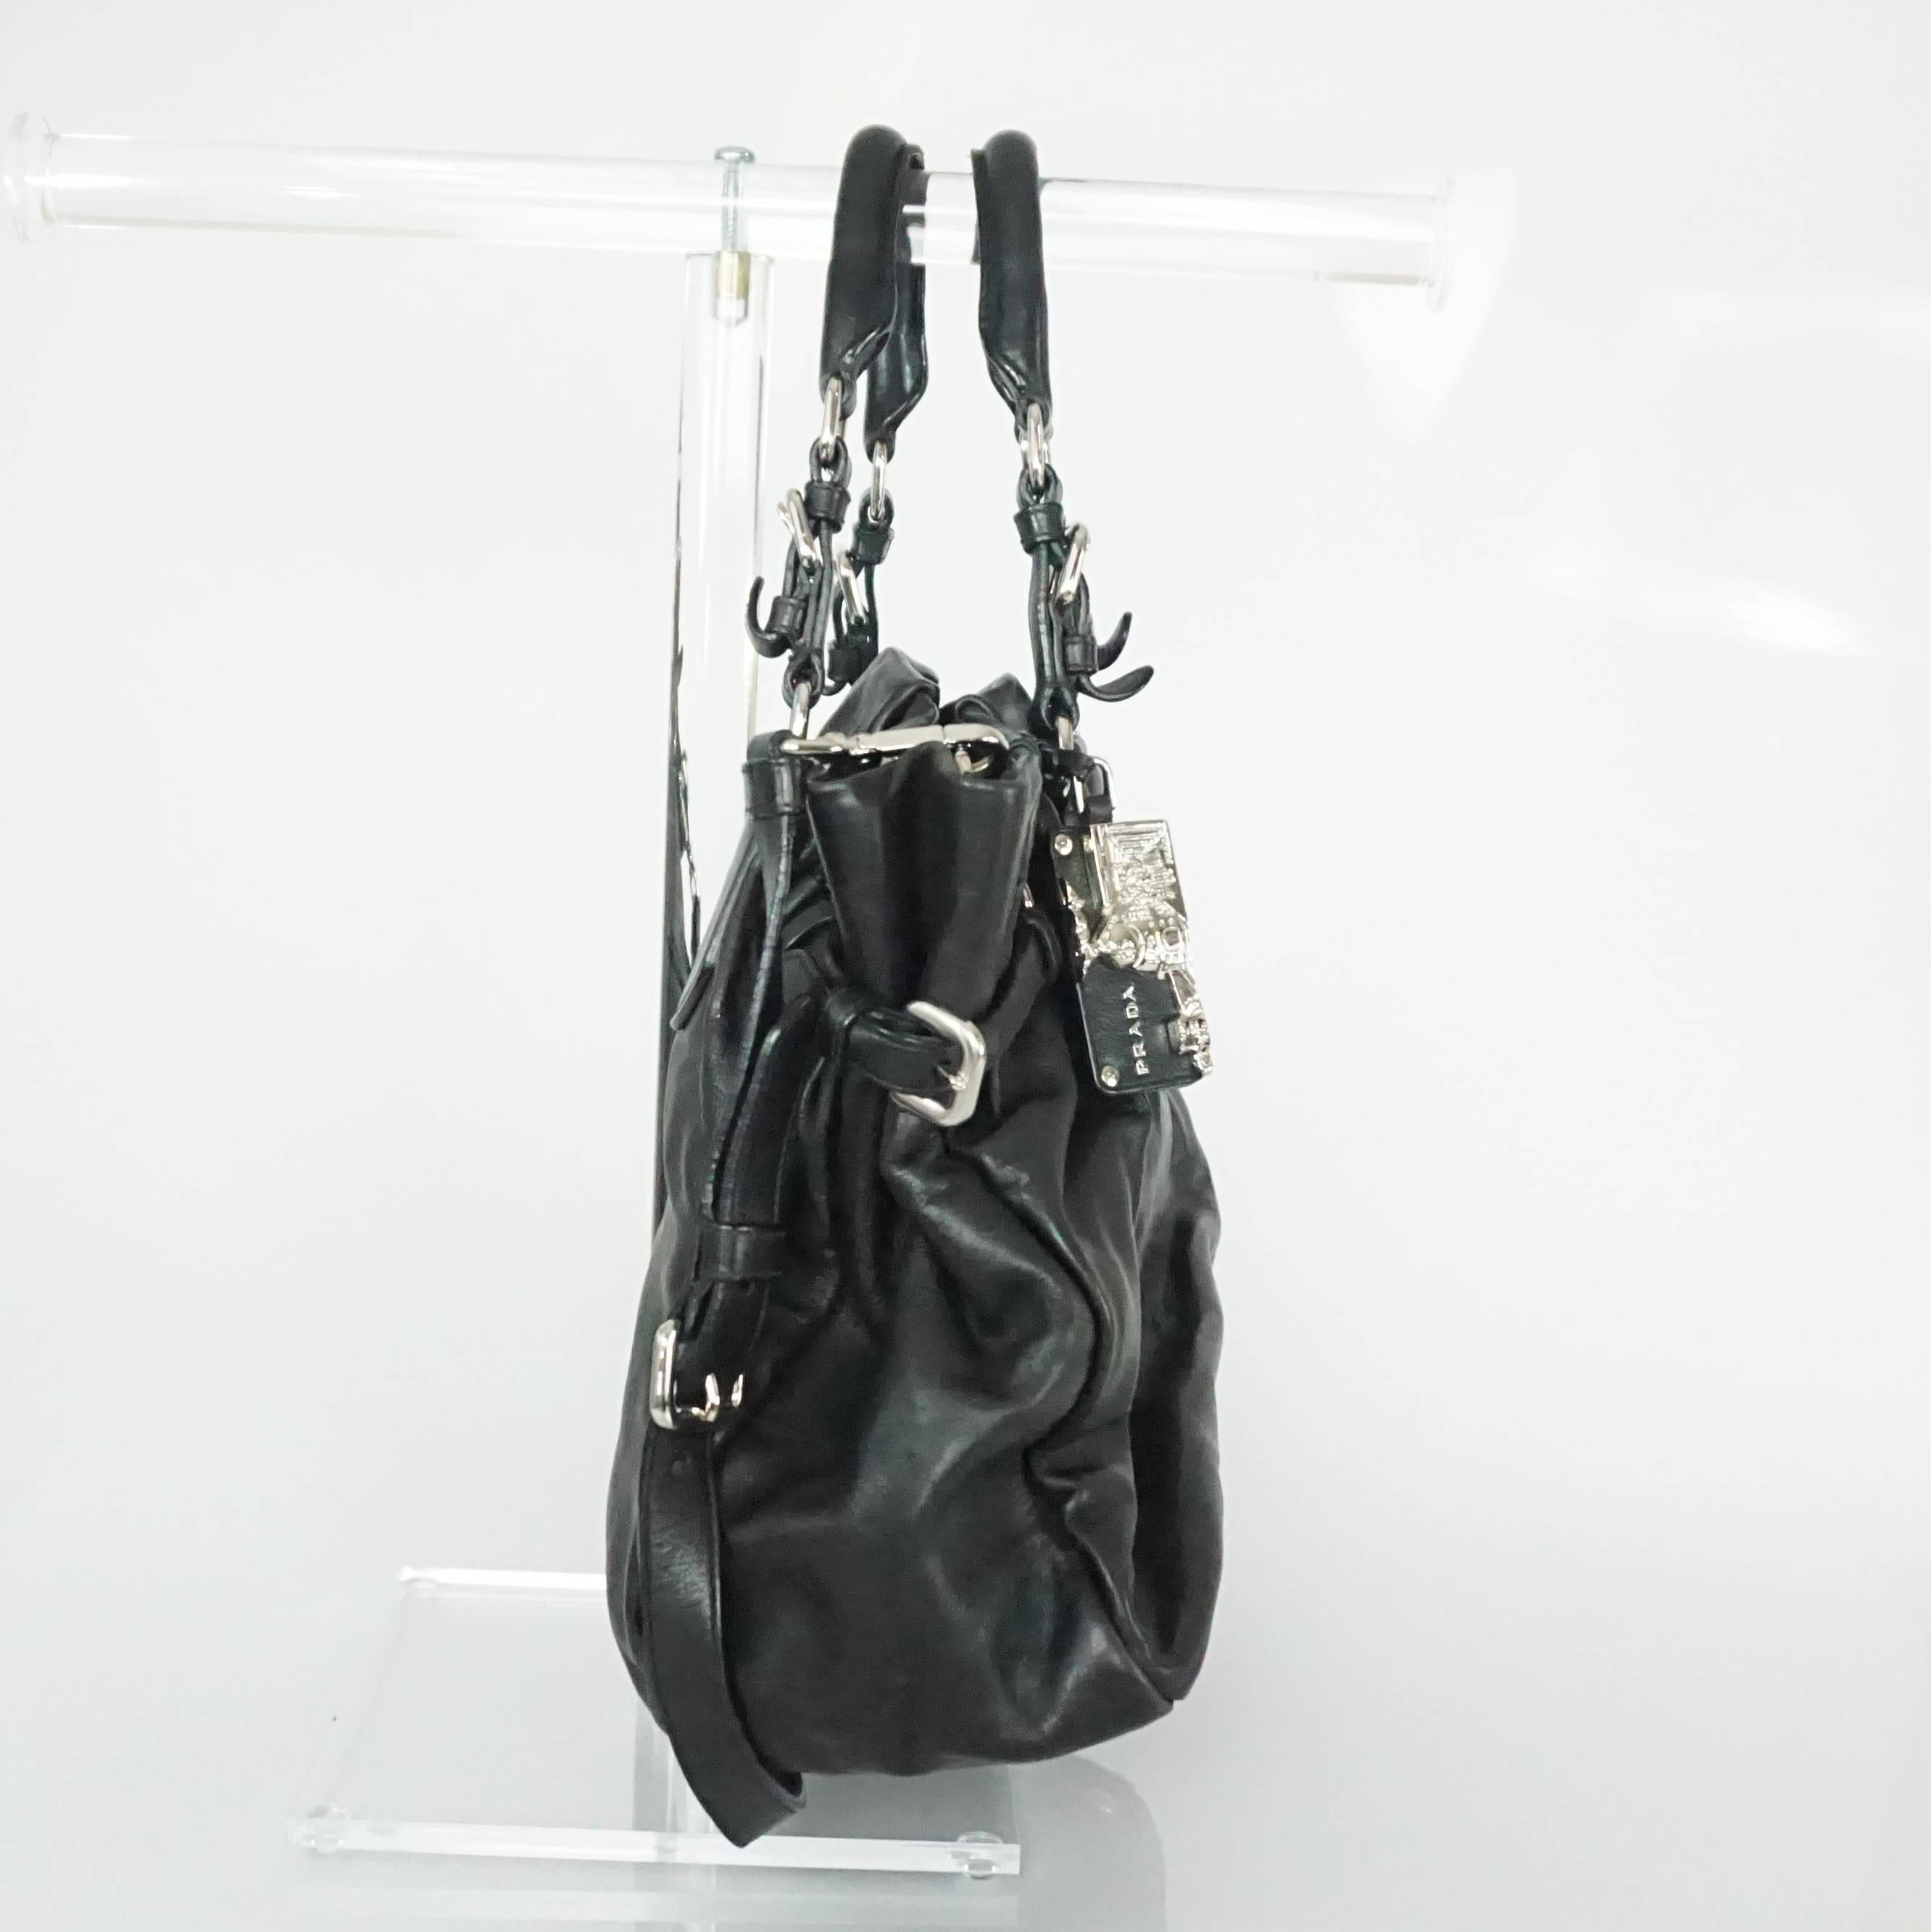 This Prada black leather shoulder bag has two handles and a crossbody strap. It has a silver logo, a silver and black leather rectangle charm, and a snap closure. It is in very good condition with minor wear to the handle.

Measurements
Height: